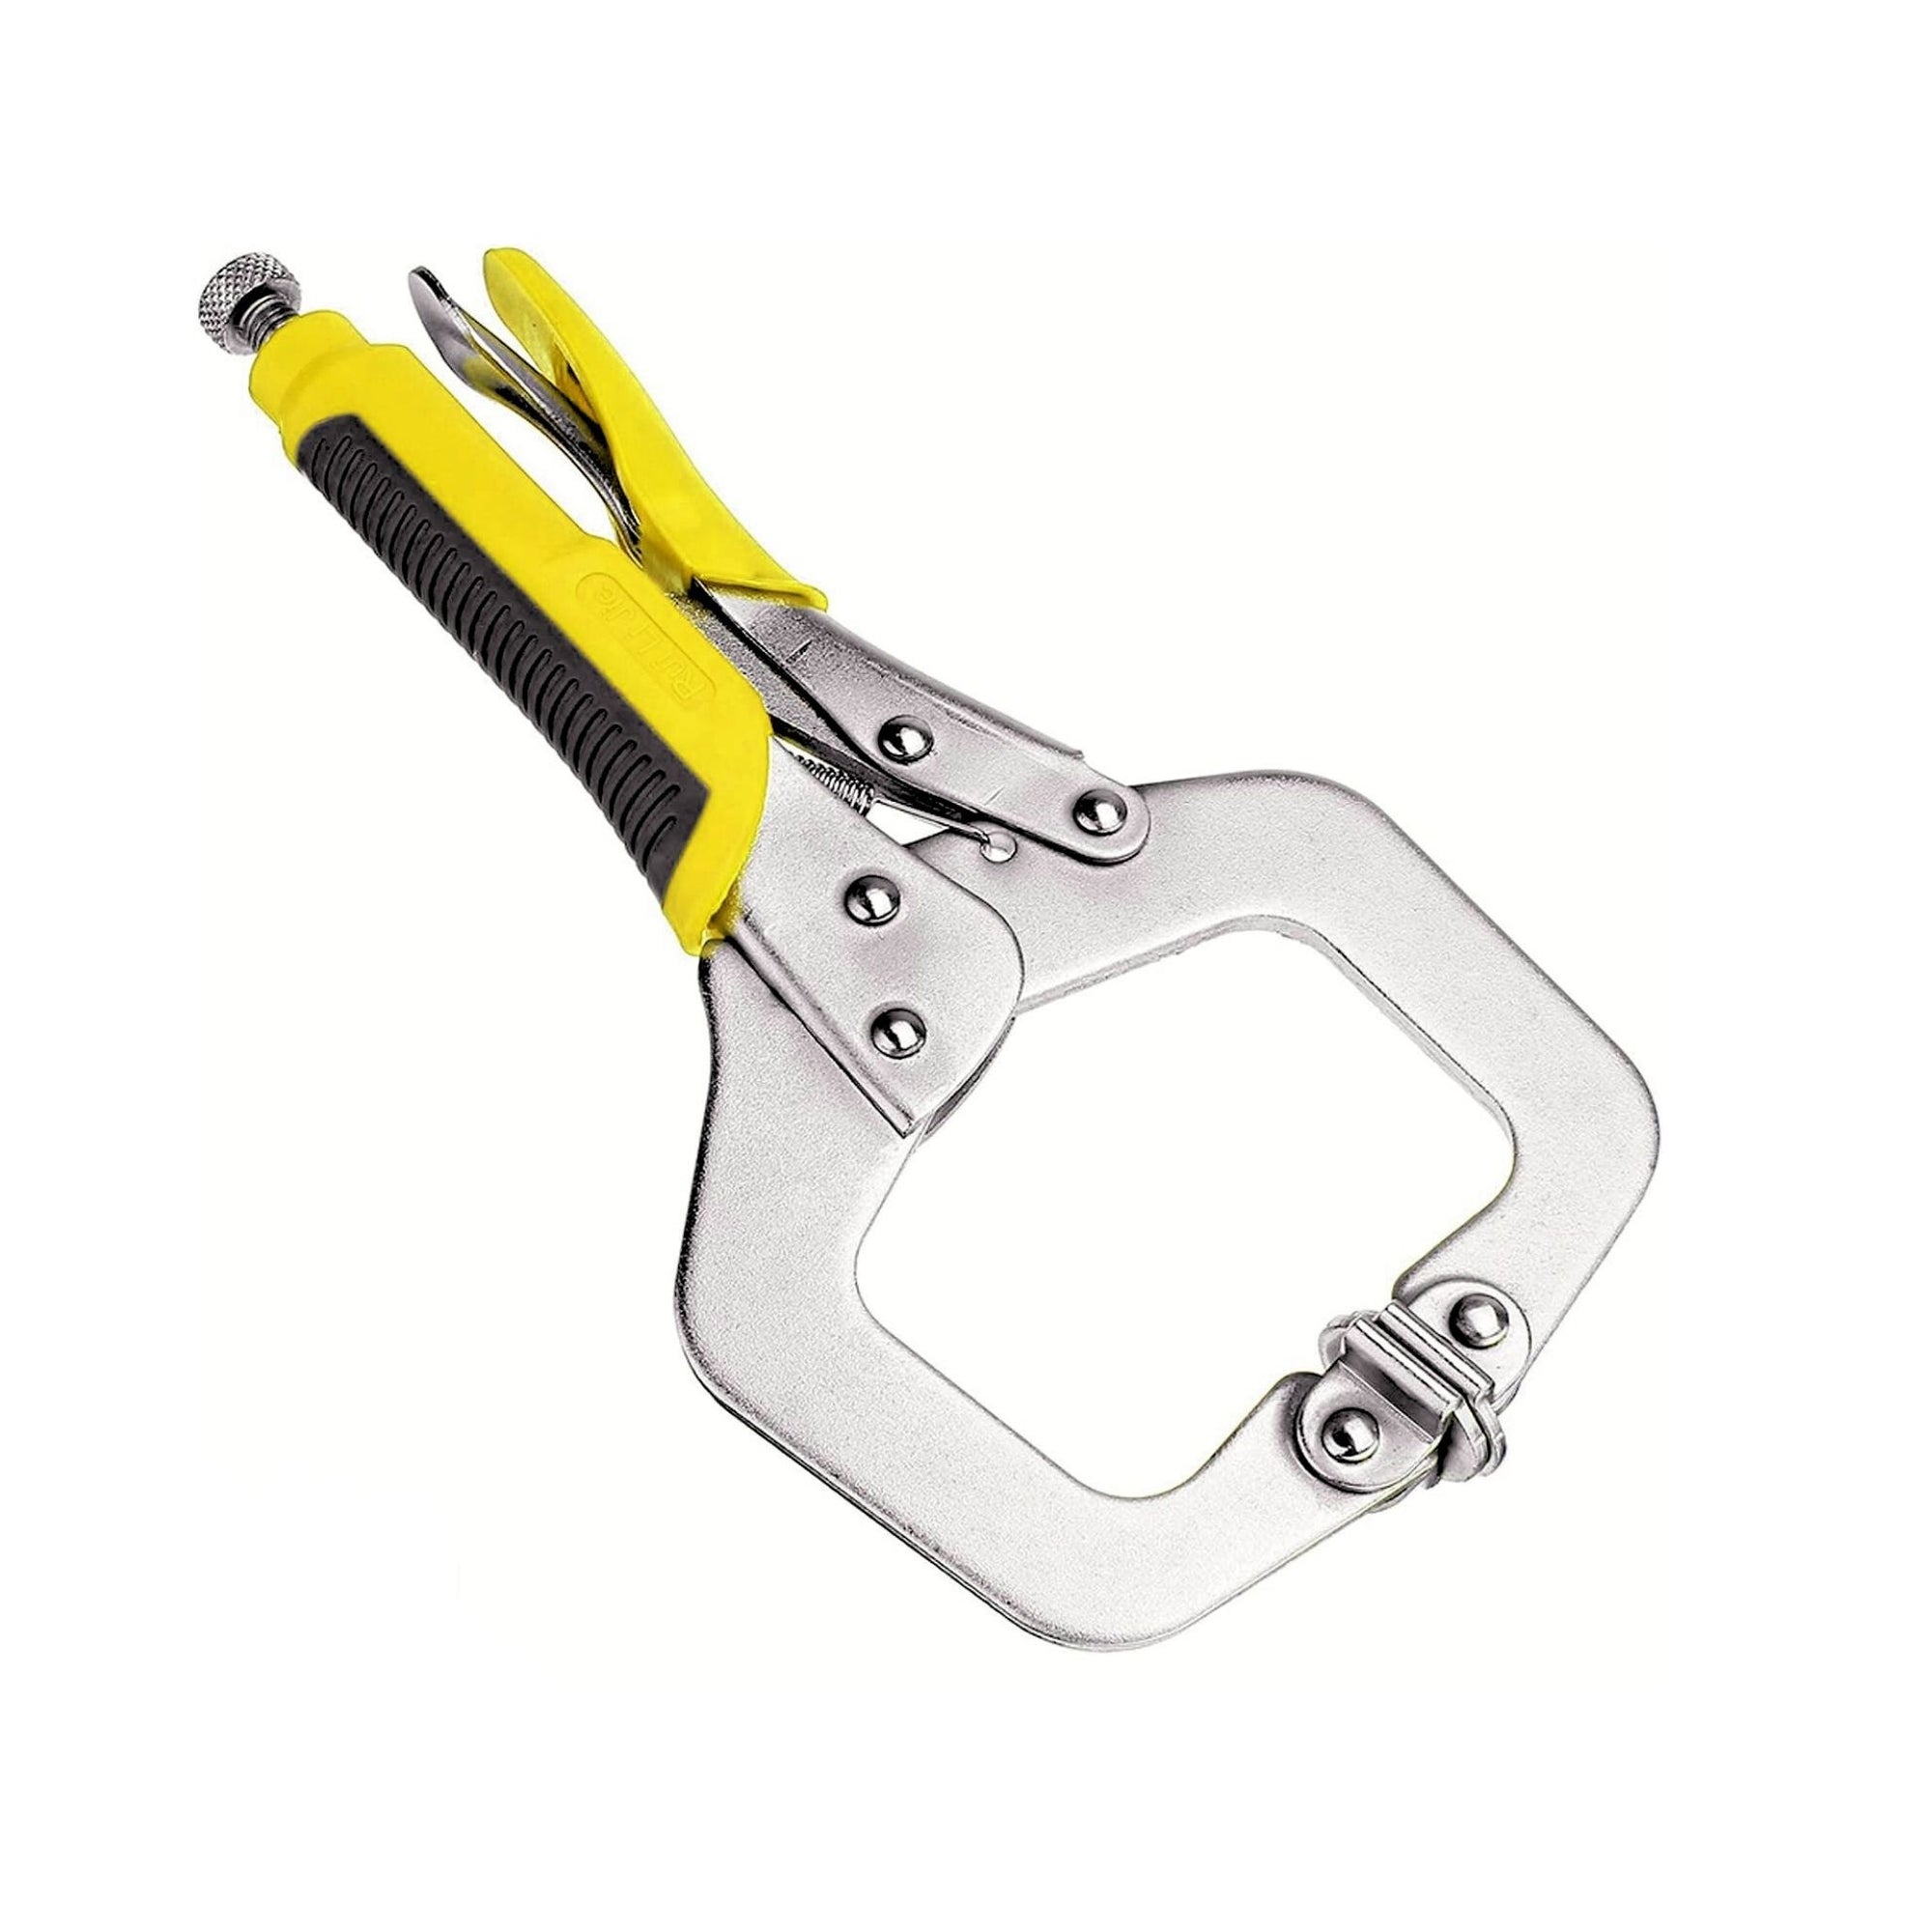 6" C Clamp Pliers with rubber handle - South East Clearance Centre